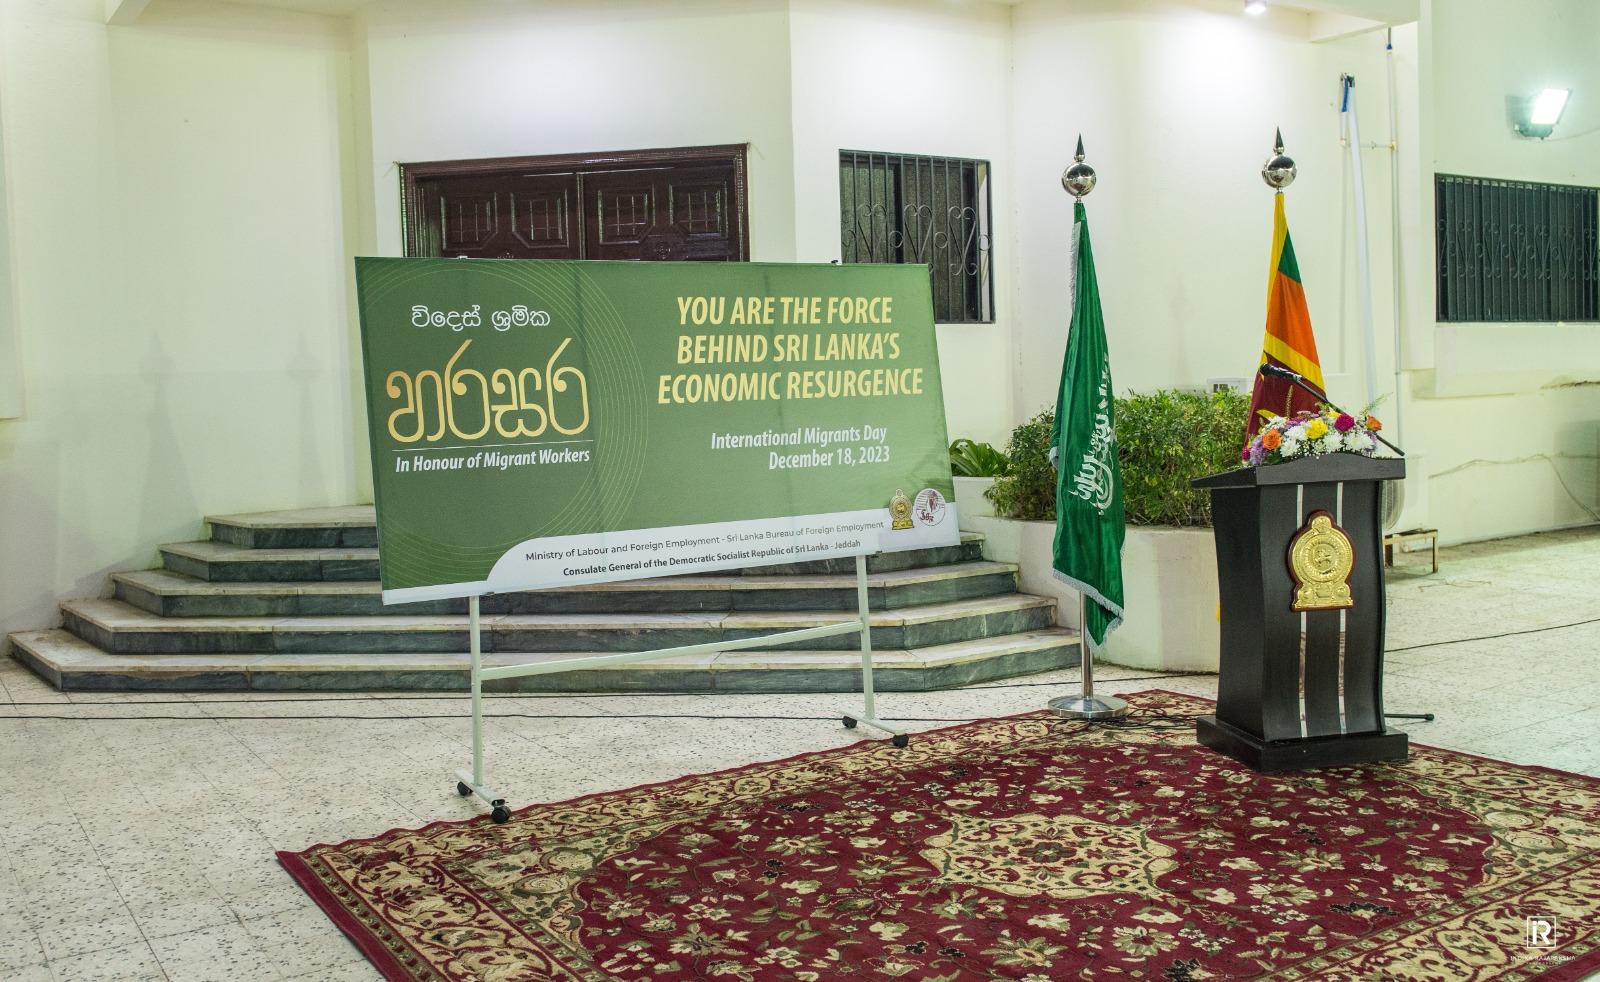 You are currently viewing International Migrants Day Celebrations held at the Consulate General of Sri Lanka – Jeddah, Saudi Arabia